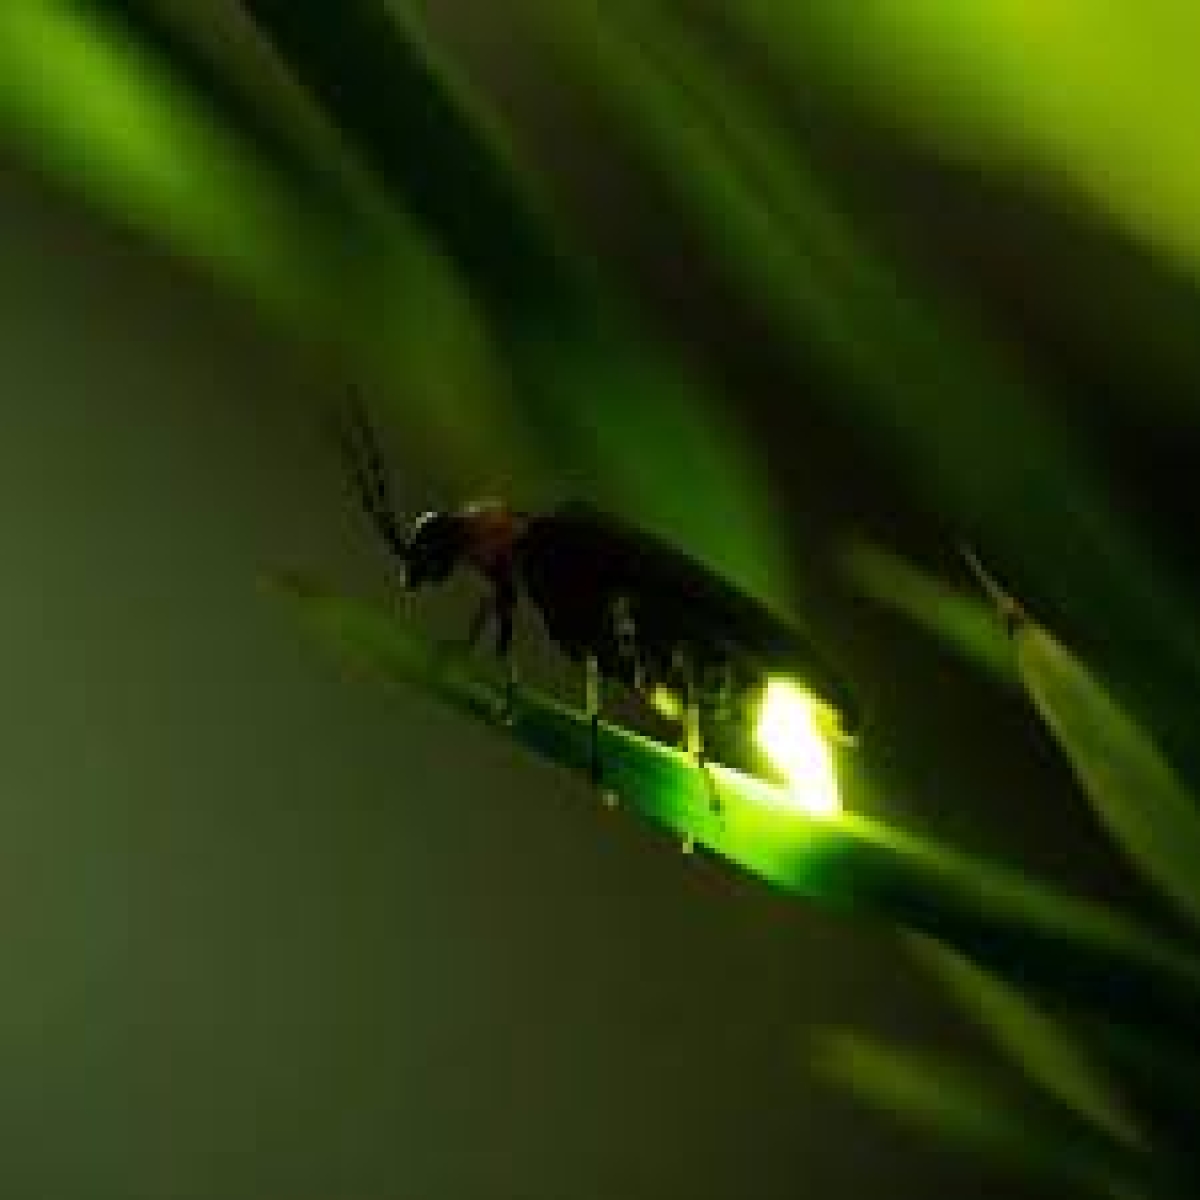 Two New Firefly Species Endemic to Sri Lanka Discovered